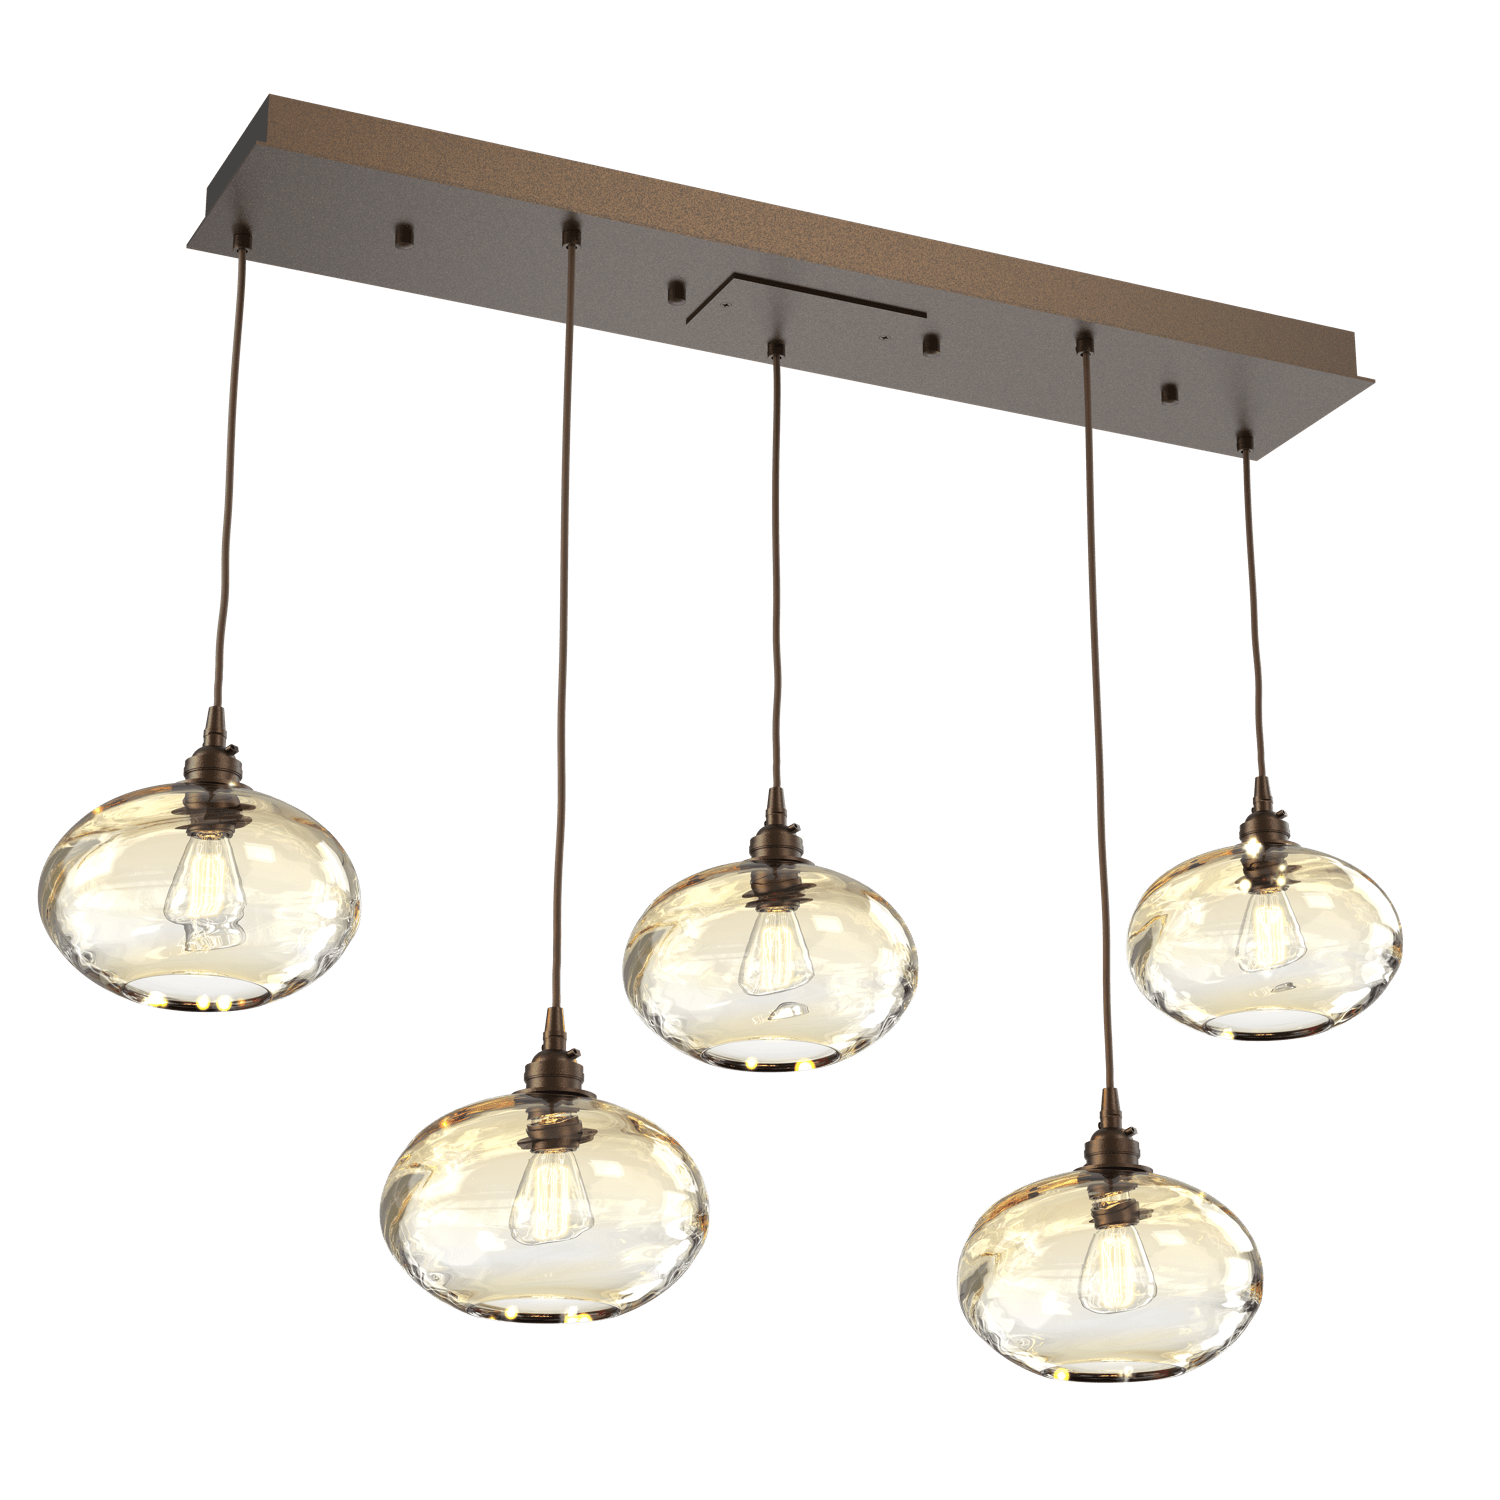 PLB0036-05-FB-OA-Hammerton-Studio-Optic-Blown-Glass-Coppa-5-light-linear-pendant-chandelier-with-flat-bronze-finish-and-optic-amber-blown-glass-shades-and-incandescent-lamping